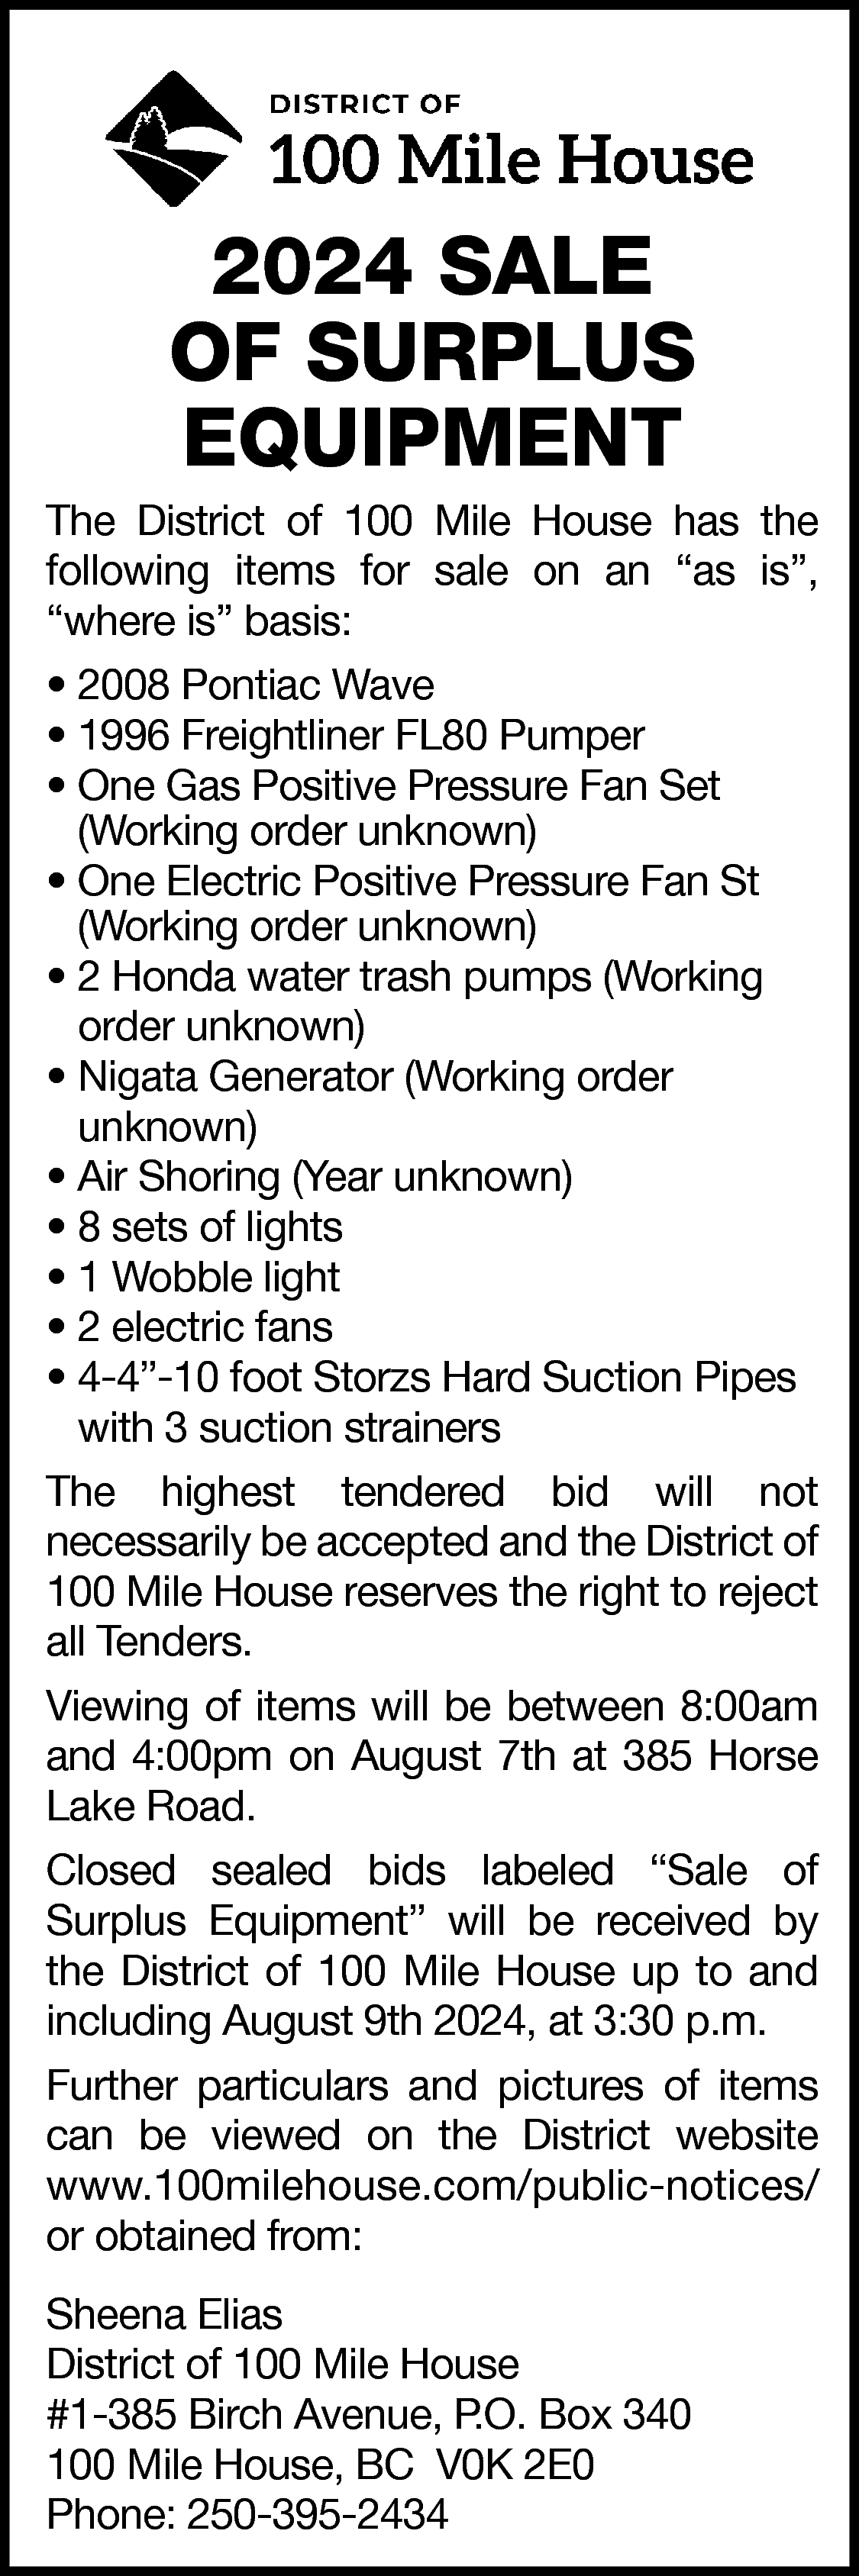 2024 SALE <br>OF SURPLUS <br>EQUIPMENT  2024 SALE  OF SURPLUS  EQUIPMENT    The District of 100 Mile House has the  following items for sale on an “as is”,  “where is” basis:  • 2008 Pontiac Wave  • 1996 Freightliner FL80 Pumper  • One Gas Positive Pressure Fan Set  (Working order unknown)  • One Electric Positive Pressure Fan St  (Working order unknown)  • 2 Honda water trash pumps (Working  order unknown)  • Nigata Generator (Working order  unknown)  • Air Shoring (Year unknown)  • 8 sets of lights  • 1 Wobble light  • 2 electric fans  • 4-4”-10 foot Storzs Hard Suction Pipes  with 3 suction strainers  The highest tendered bid will not  necessarily be accepted and the District of  100 Mile House reserves the right to reject  all Tenders.  Viewing of items will be between 8:00am  and 4:00pm on August 7th at 385 Horse  Lake Road.  Closed sealed bids labeled “Sale of  Surplus Equipment” will be received by  the District of 100 Mile House up to and  including August 9th 2024, at 3:30 p.m.  Further particulars and pictures of items  can be viewed on the District website  www.100milehouse.com/public-notices/  or obtained from:  Sheena Elias  District of 100 Mile House  #1-385 Birch Avenue, P.O. Box 340  100 Mile House, BC V0K 2E0  Phone: 250-395-2434    